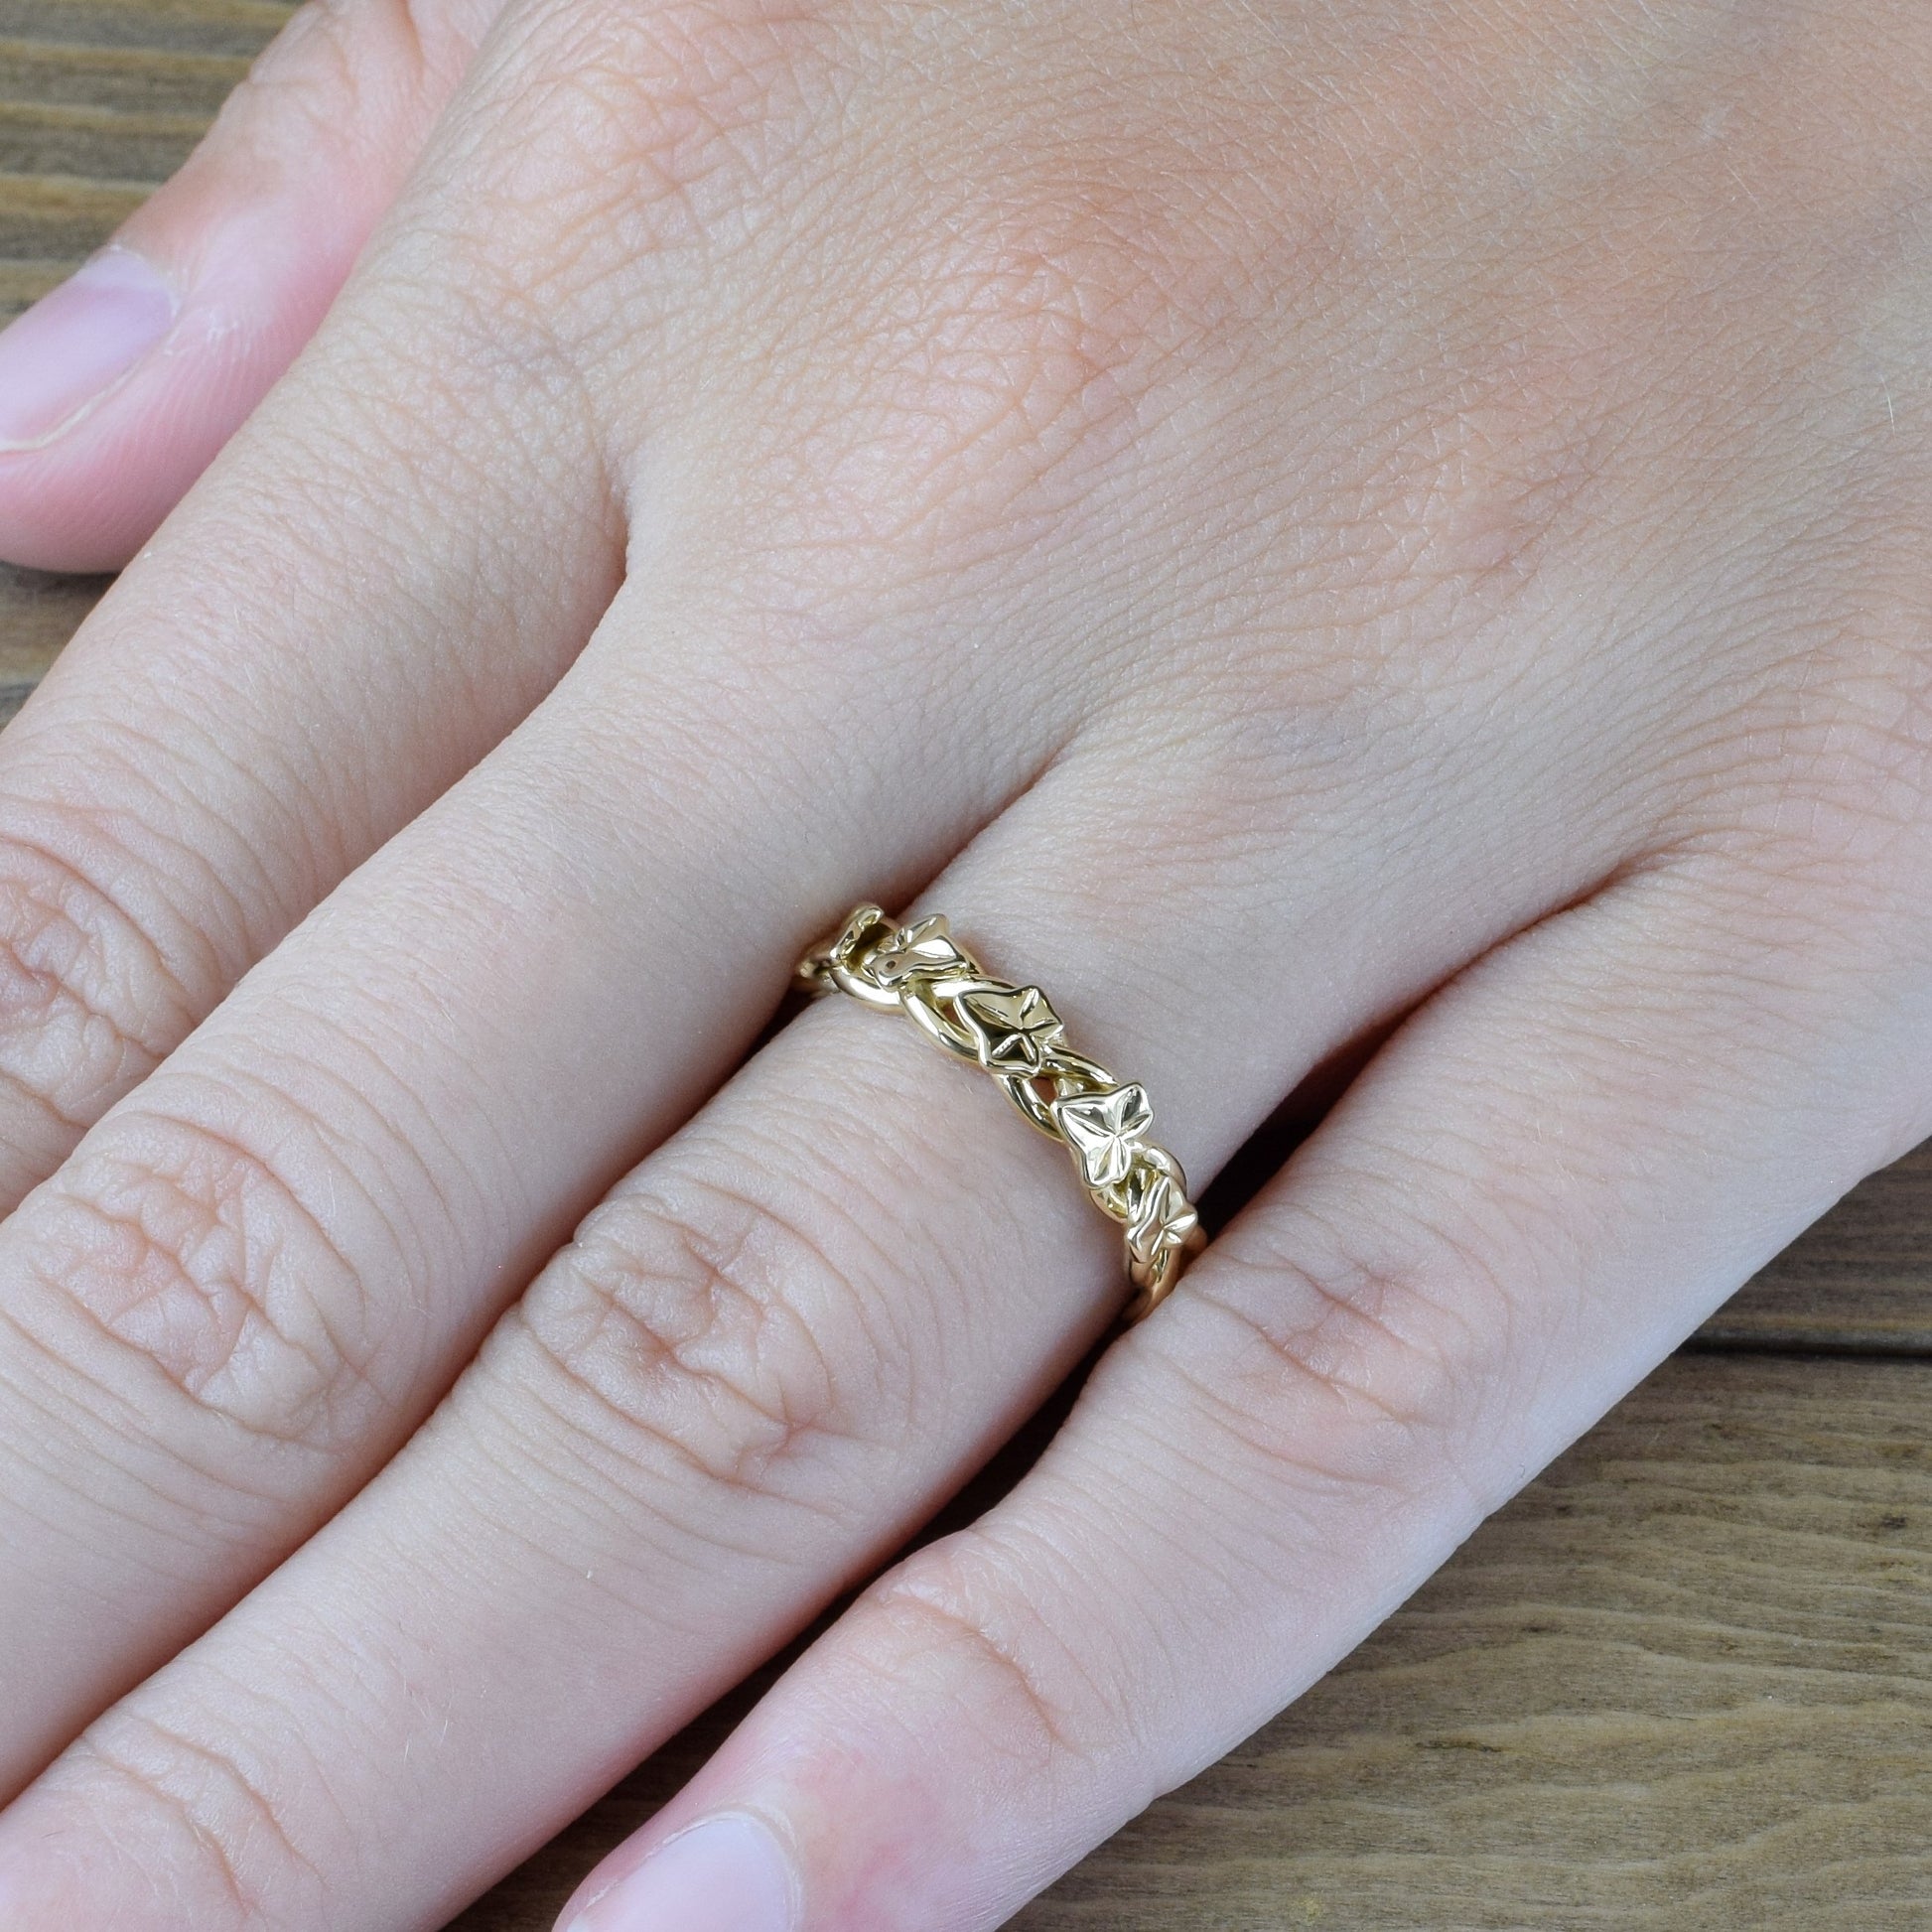 braided ivy vines with leaves ring in yellow gold on finger